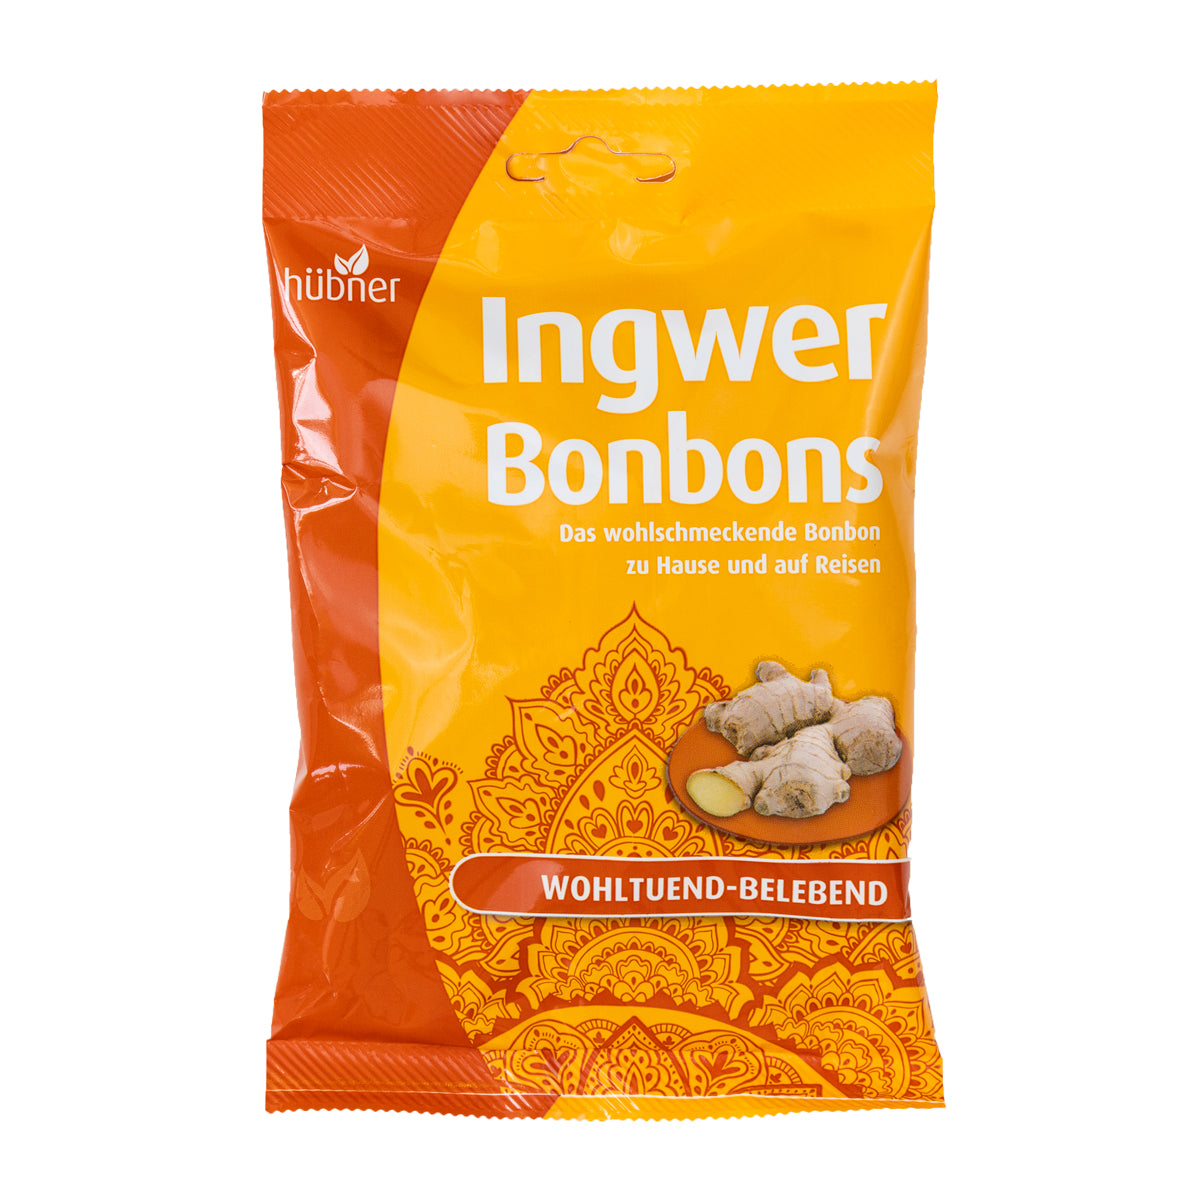 Primary image of Ginger Bonbon Drops